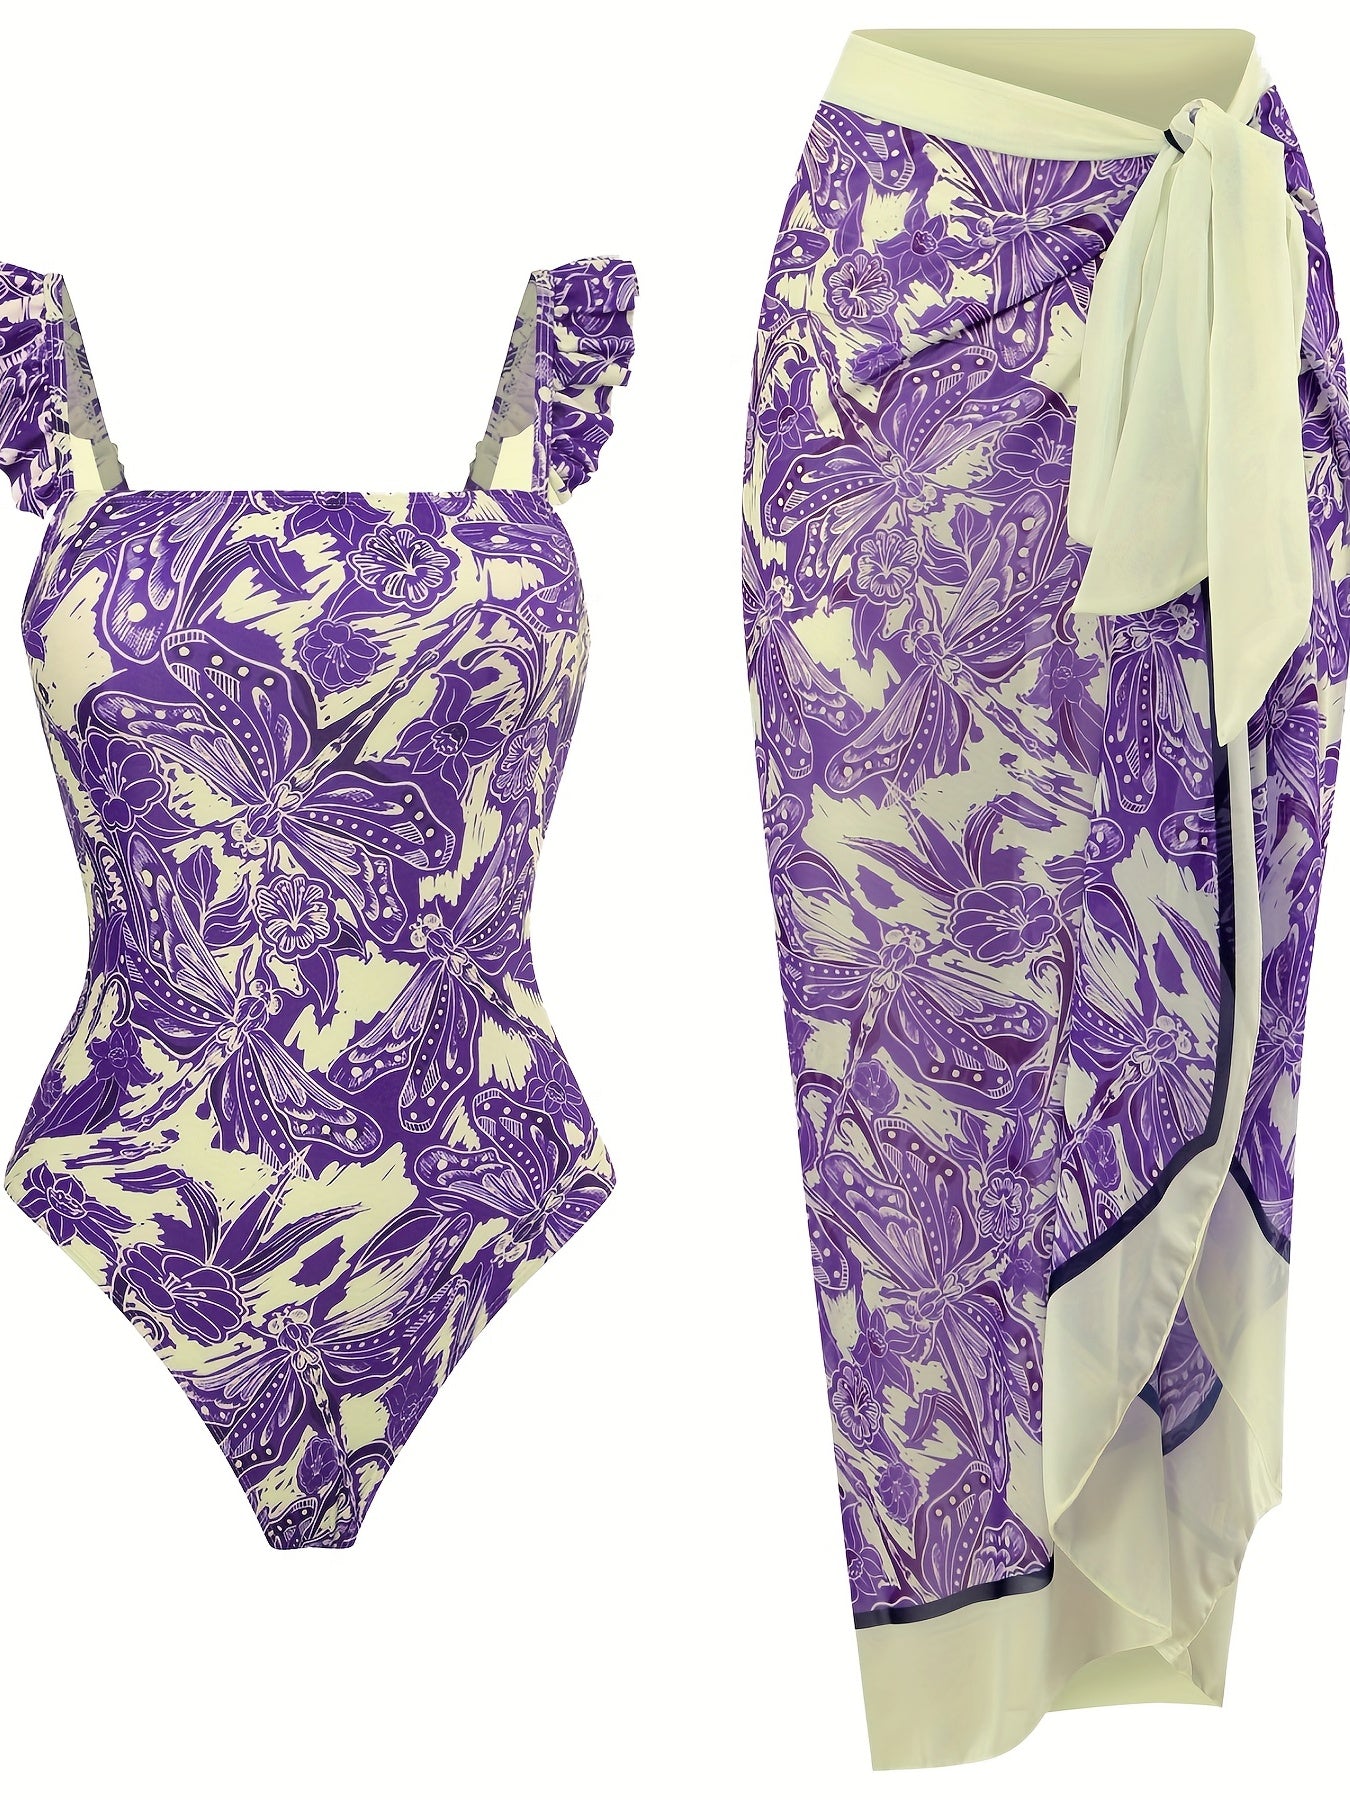 Women's Two-Piece  Swimsuit with Cover-Up, Sporlike Design, Tropical Print, Tummy Control, and Trendy monokini Bathing Suit